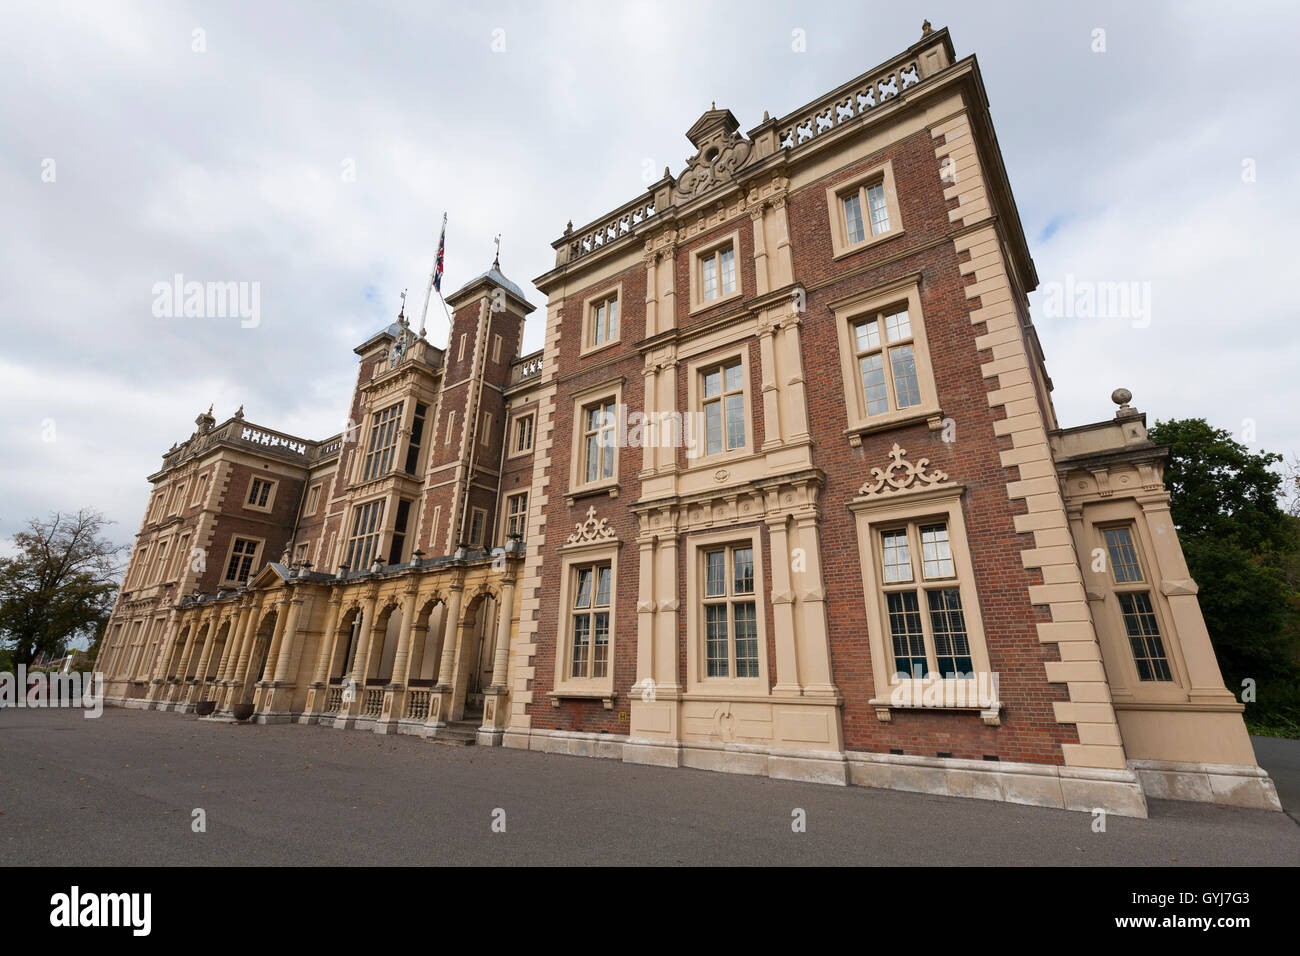 Kneller Hall, Whitton, Twickenham, which houses the Royal Military School of Music, and is home to the Museum of Army Music. UK Stock Photo